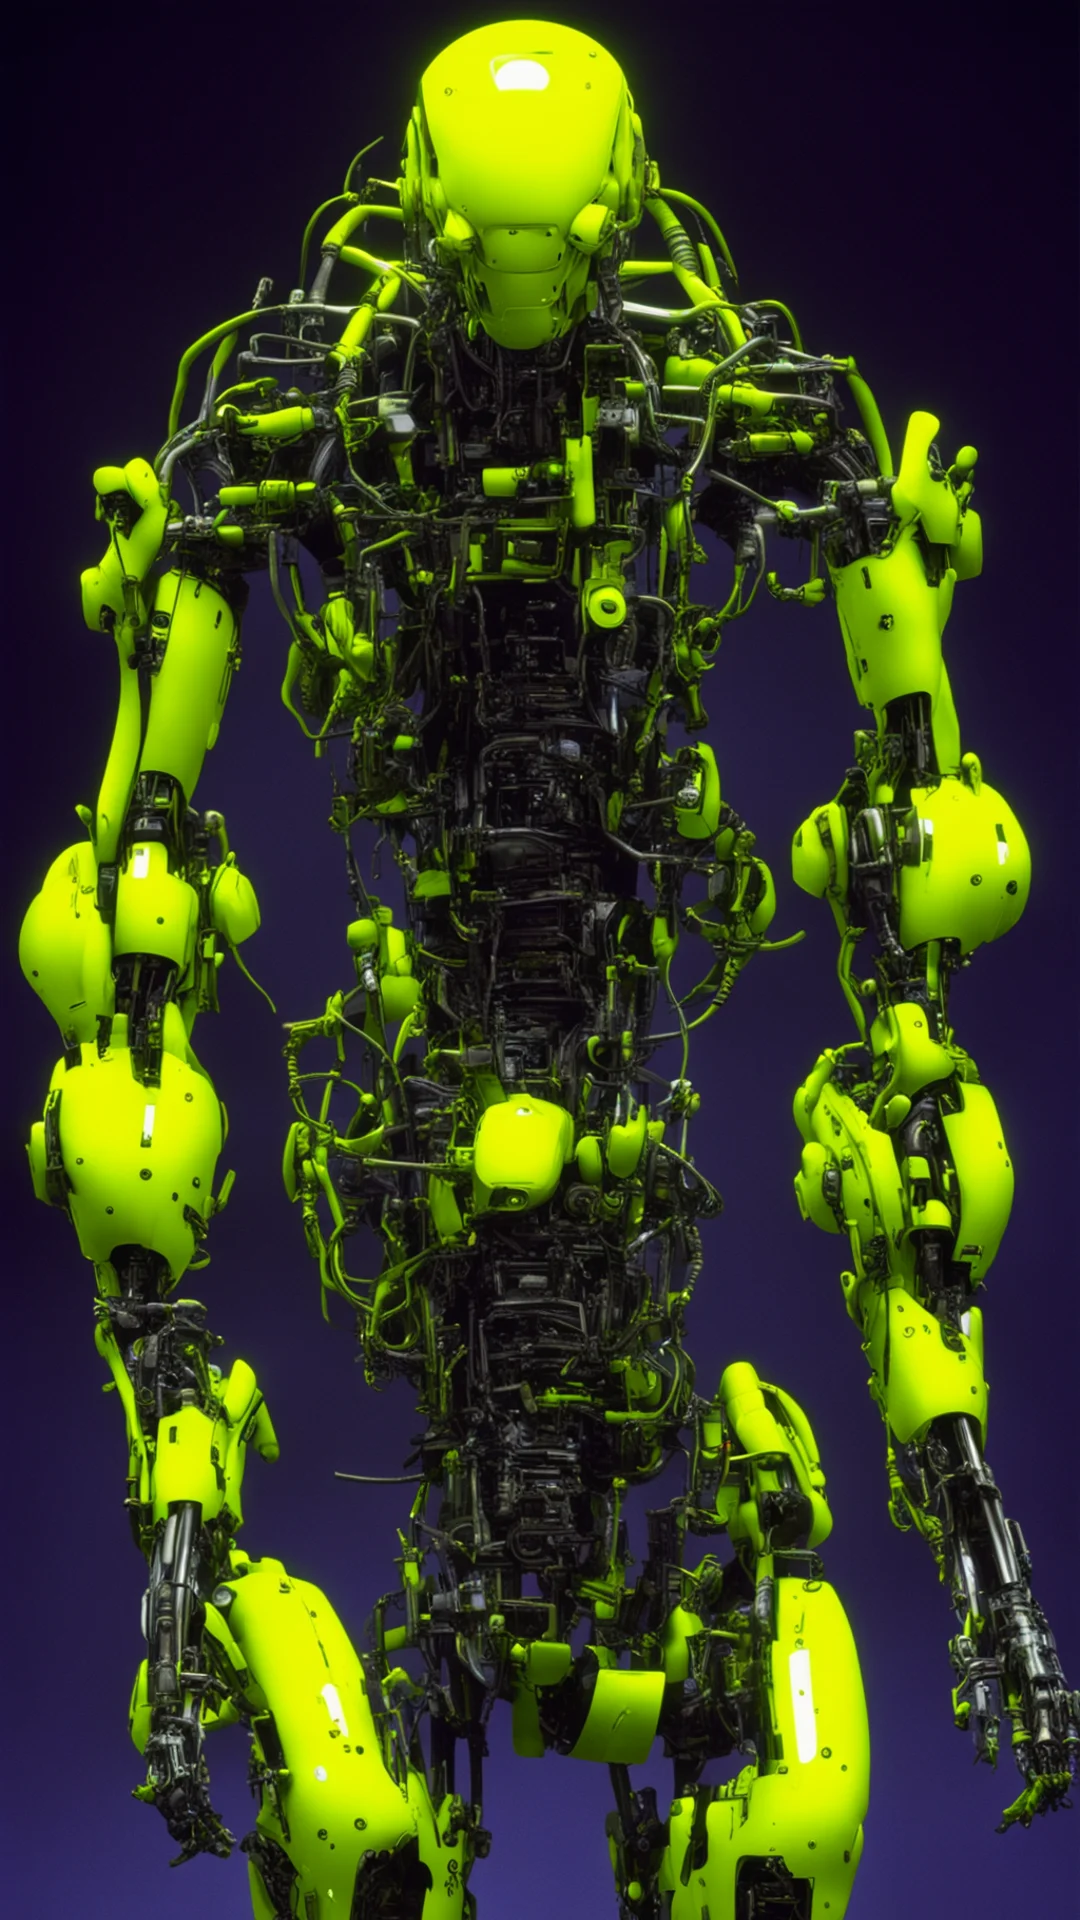 from movie event horizon 1997 from movie virus 1999 show glowing yellow green eyed multiple handed humanoid monster robots made of machine parts and flesh render confident engaging wow artstation ar